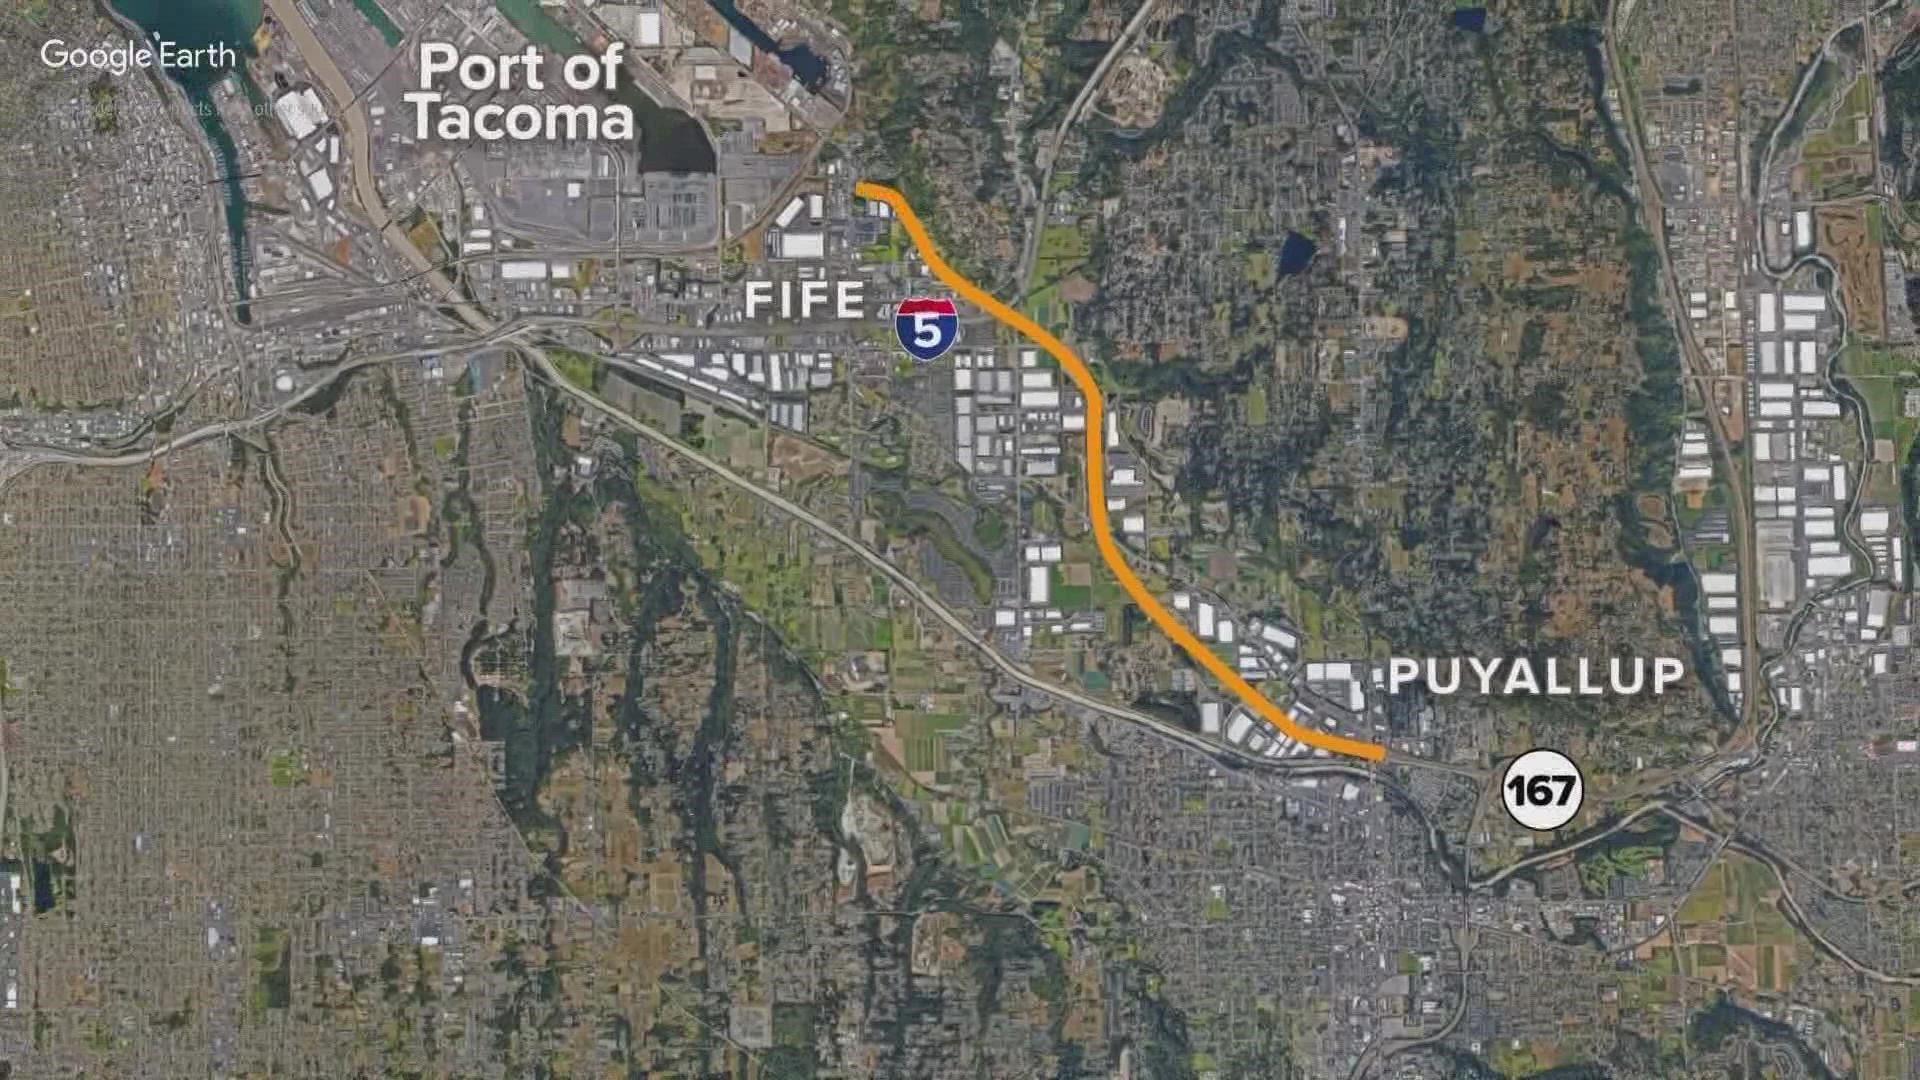 It’s a project that’s been talked about for decades, a much-needed cure to the congestion from semis going to and from the Port of Tacoma.